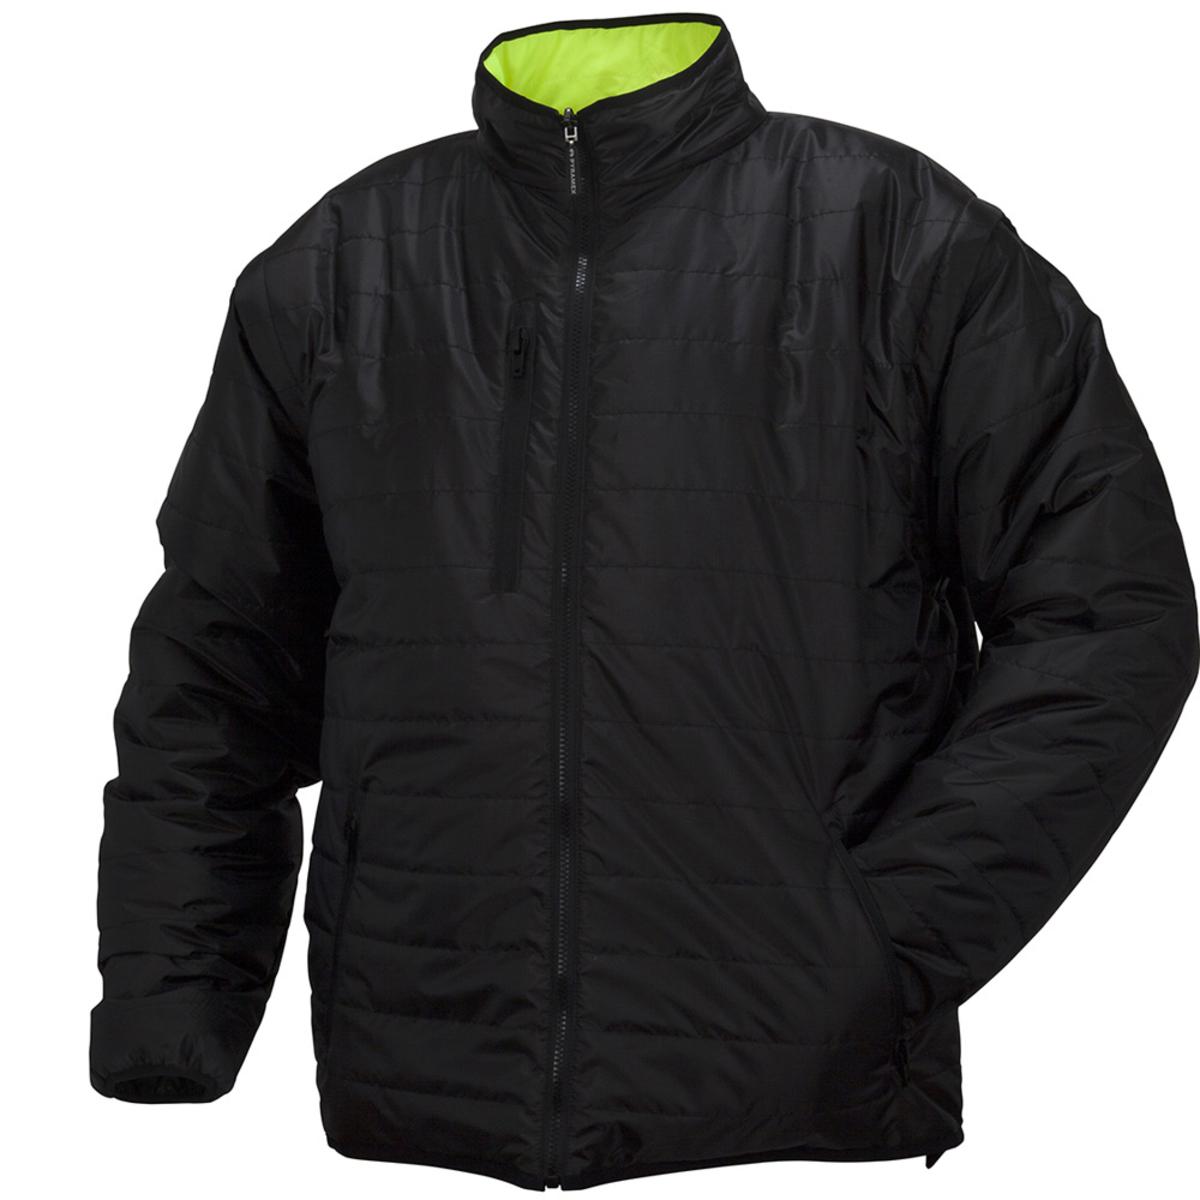 Pyramex Safety Winter Wear RJR33 Series Class 3 Hi-Vis Lime 4-in-1 Quilted Reversible Jacket